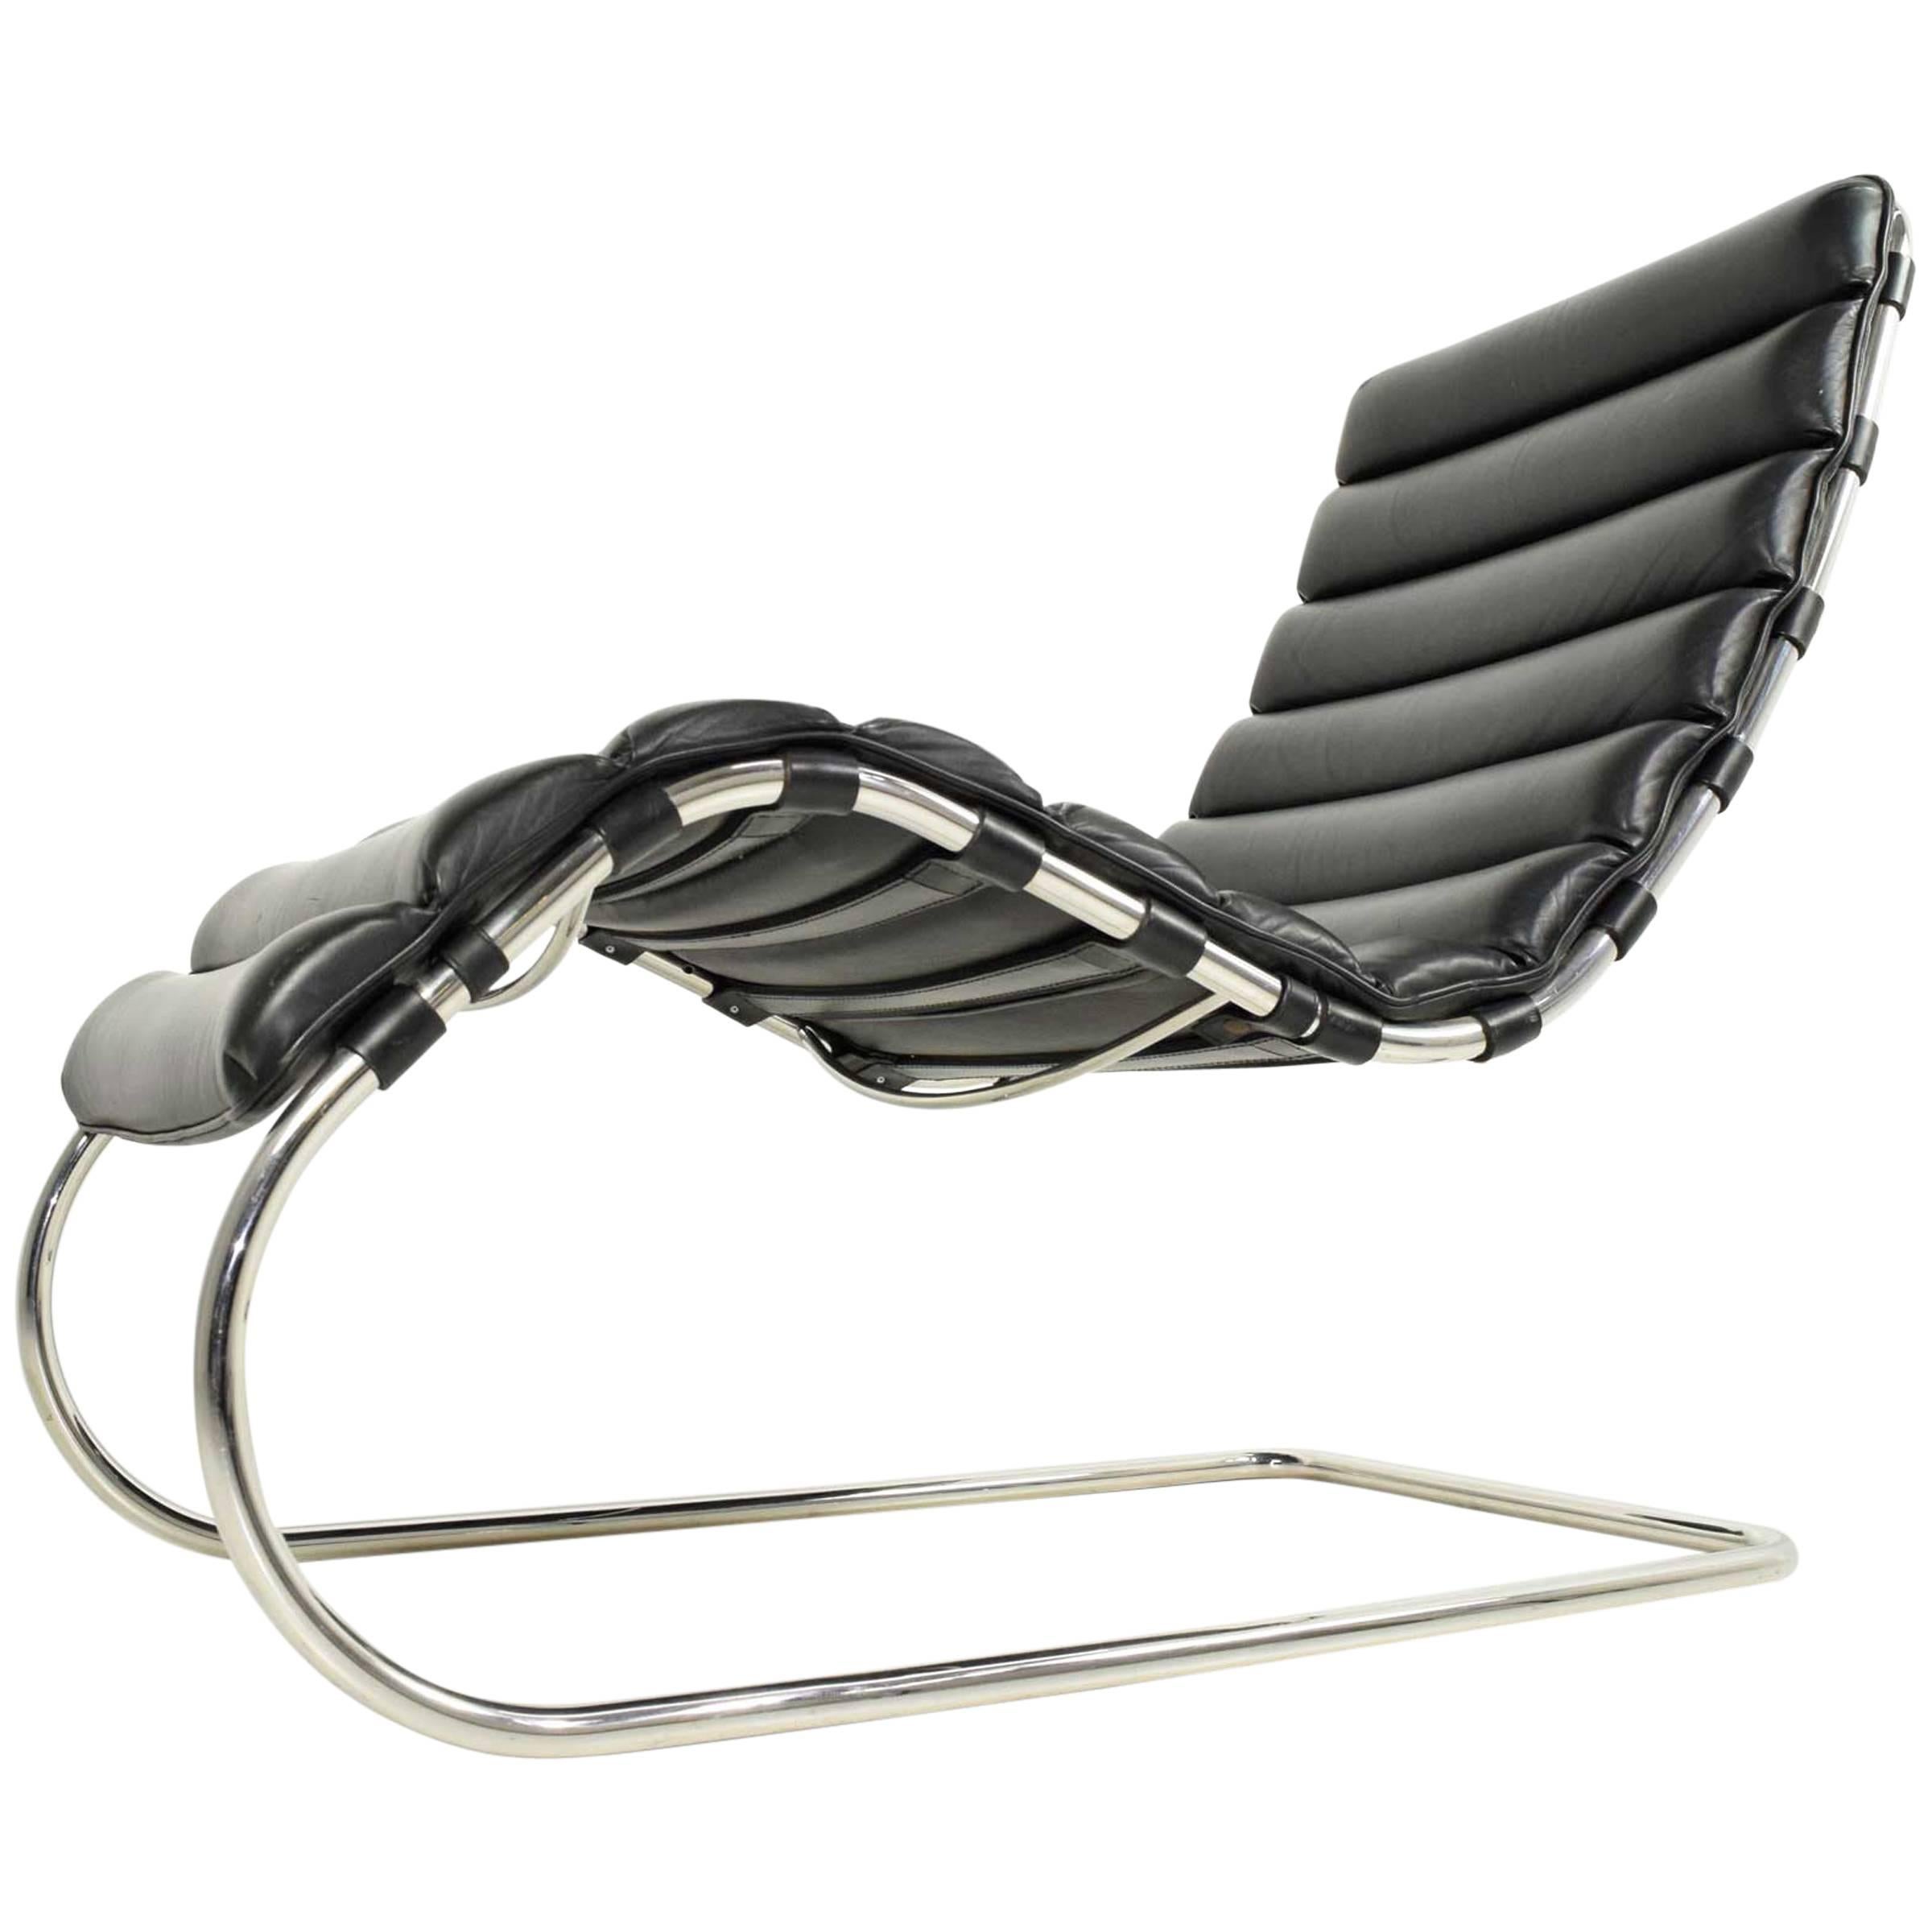 MR Chaise by Ludwig Mies van der Rohe, Knoll